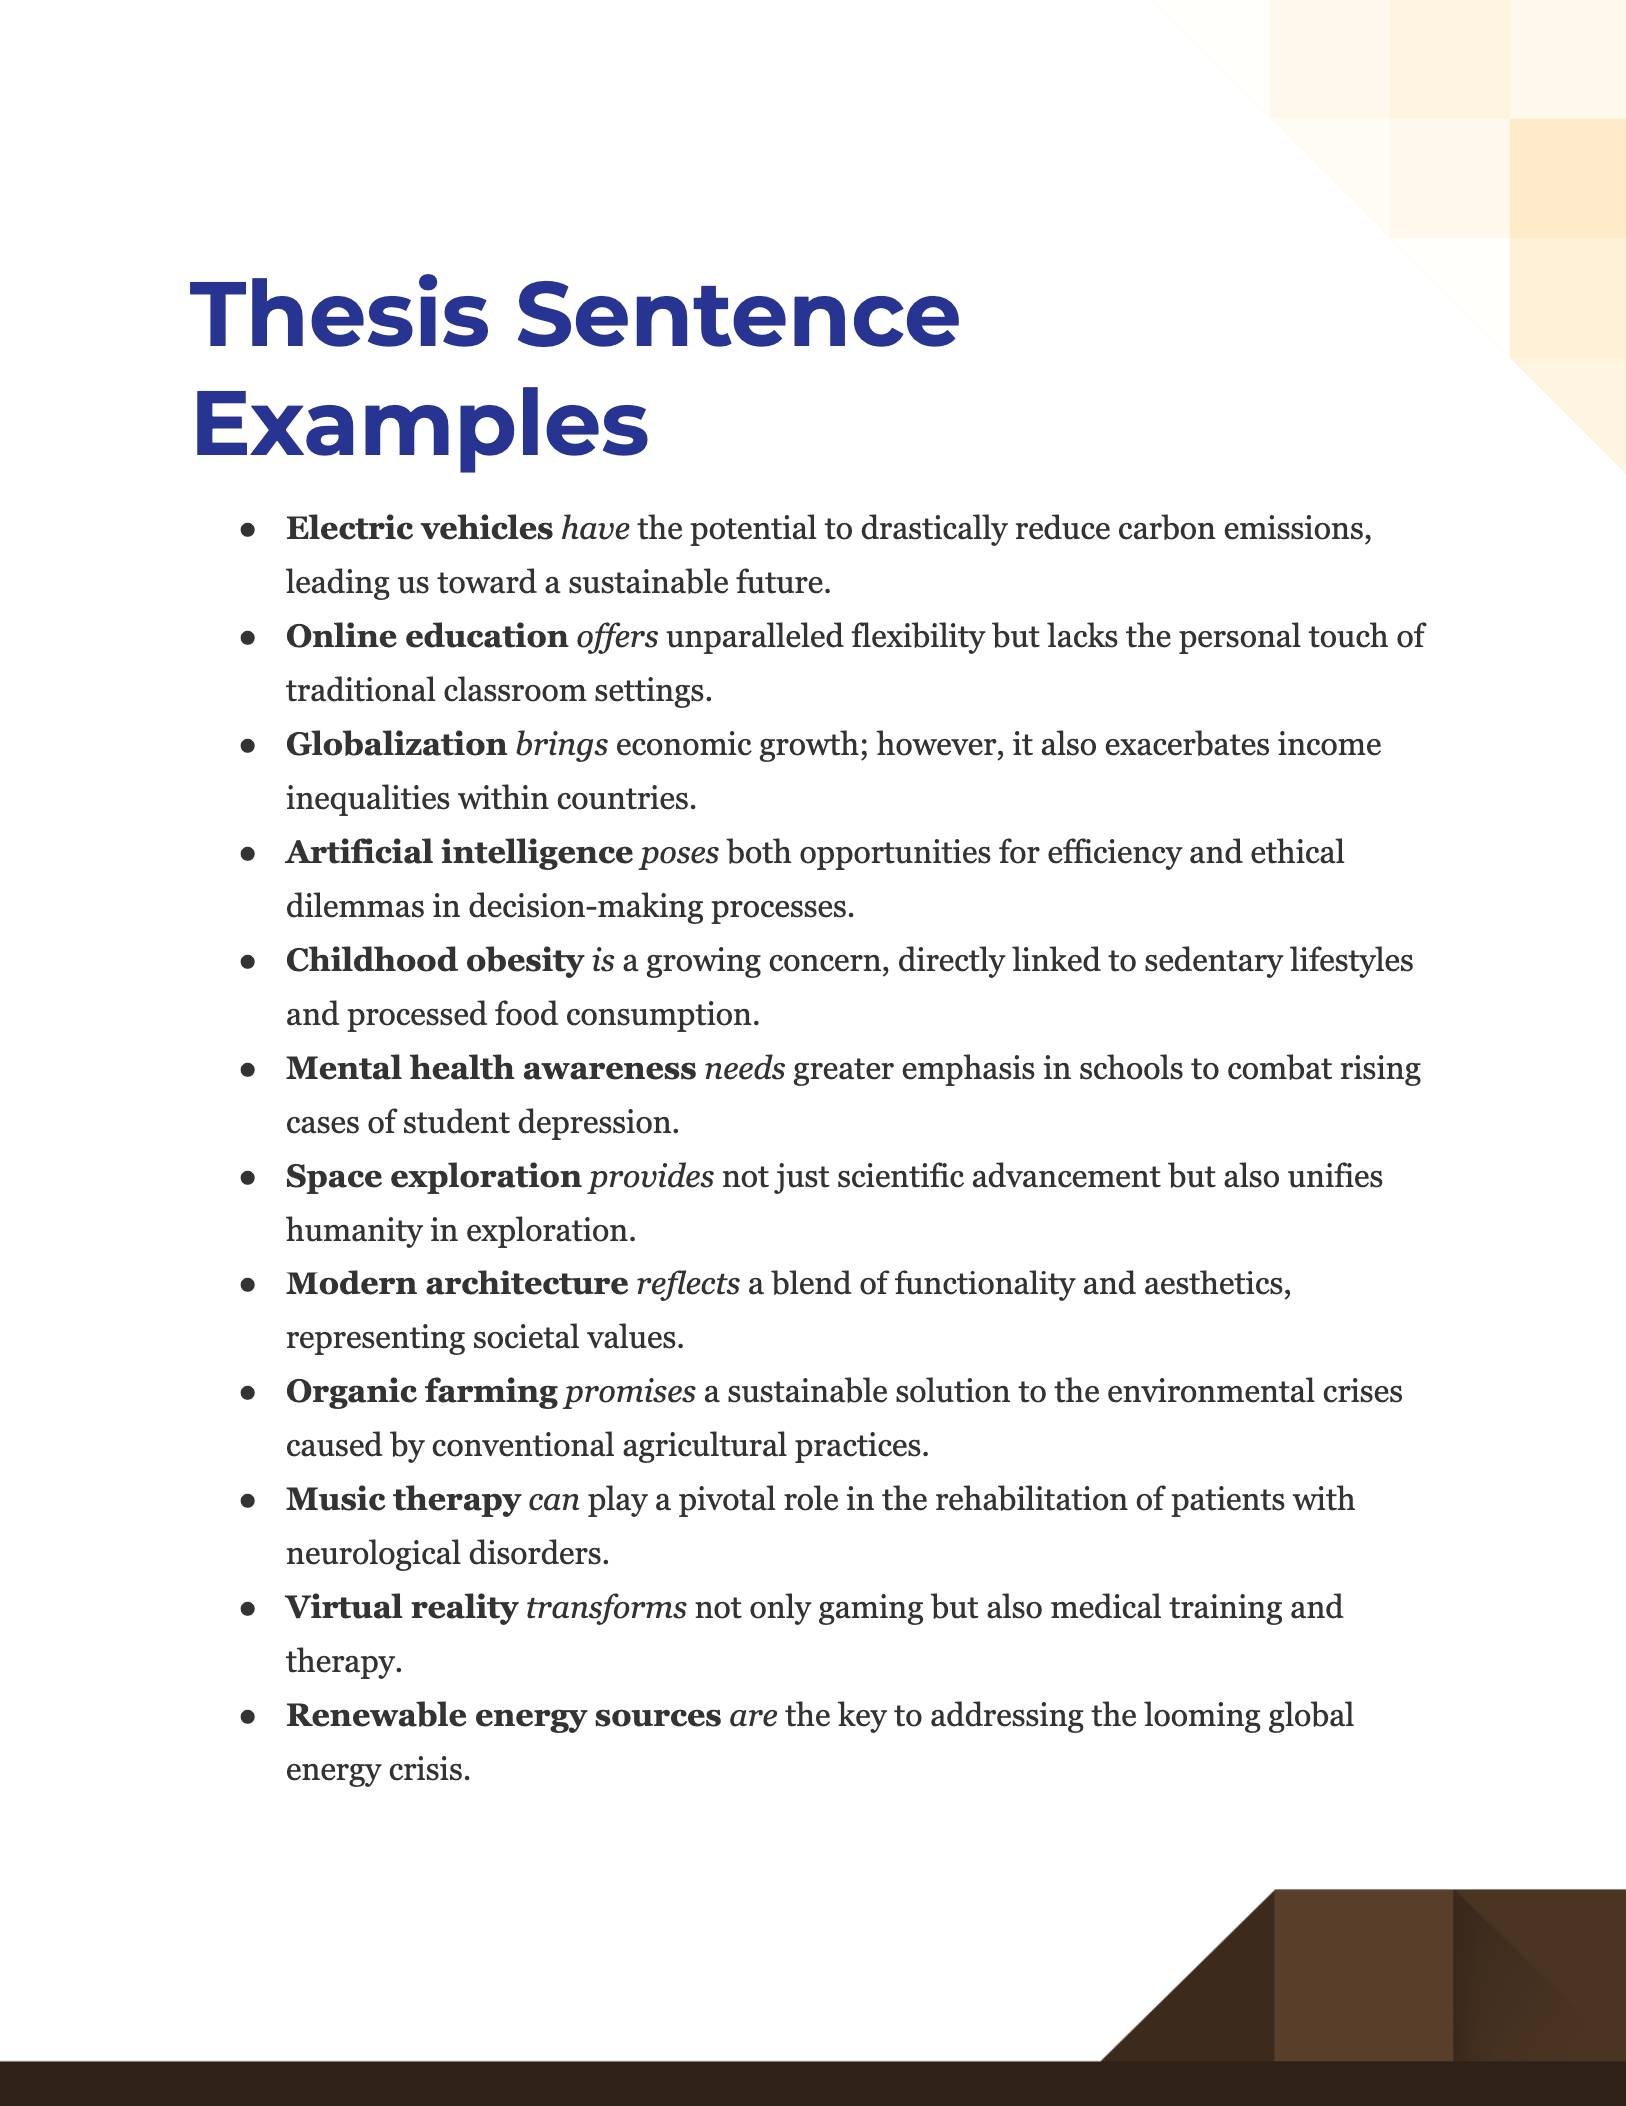 a sentence use thesis